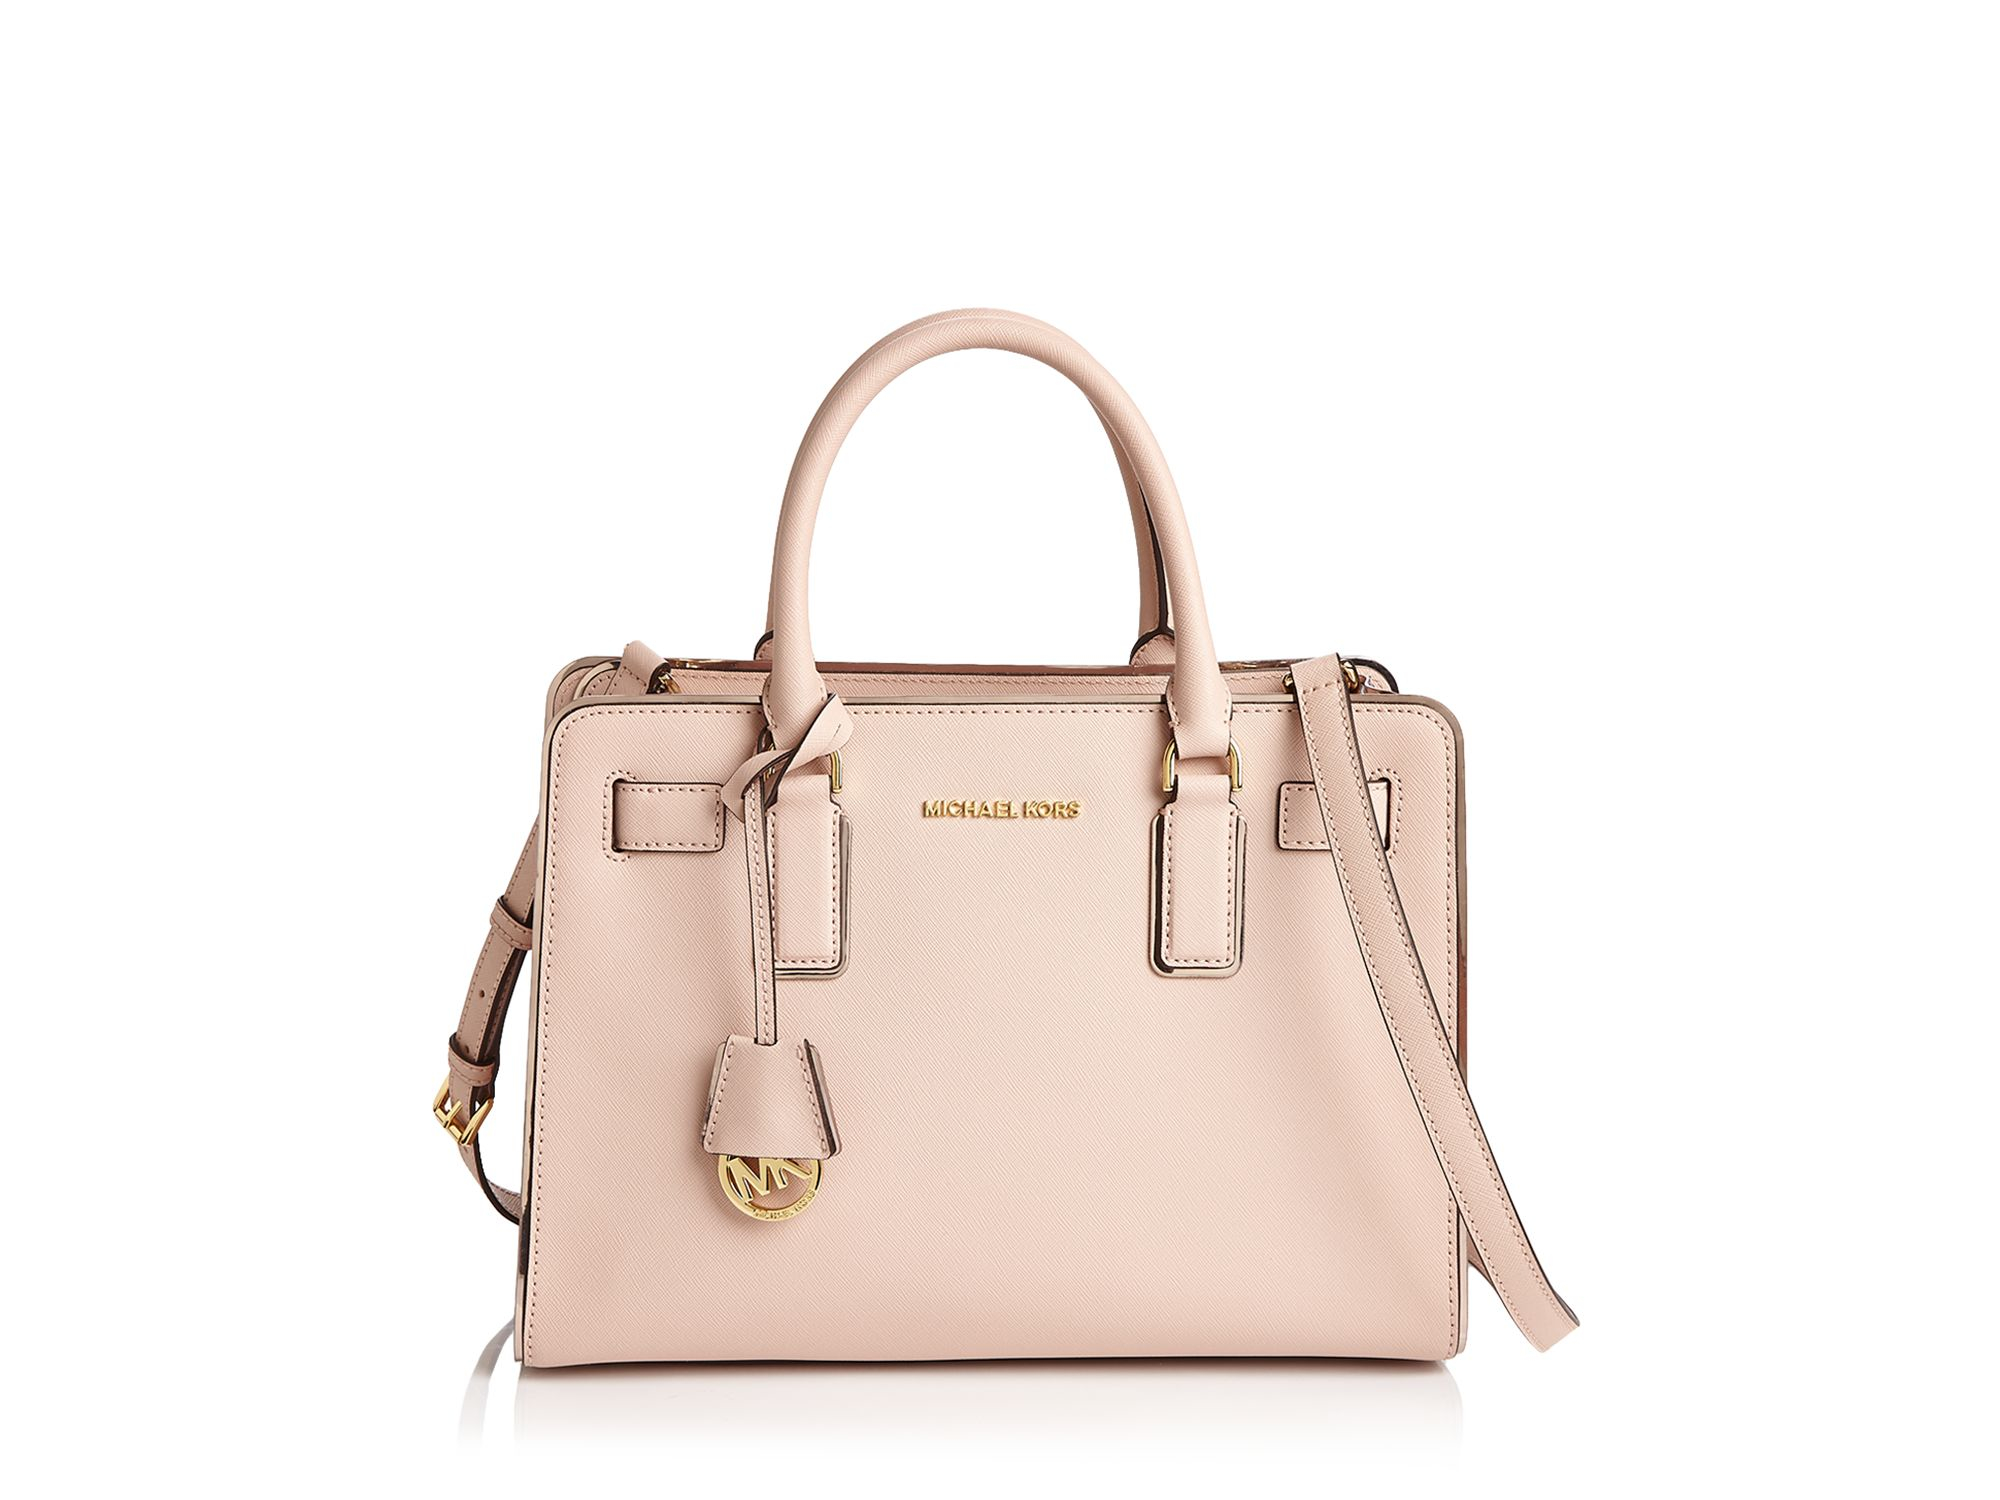 MICHAEL Michael Kors Dillon Saffiano-Leather Satchel in Pink | Lyst